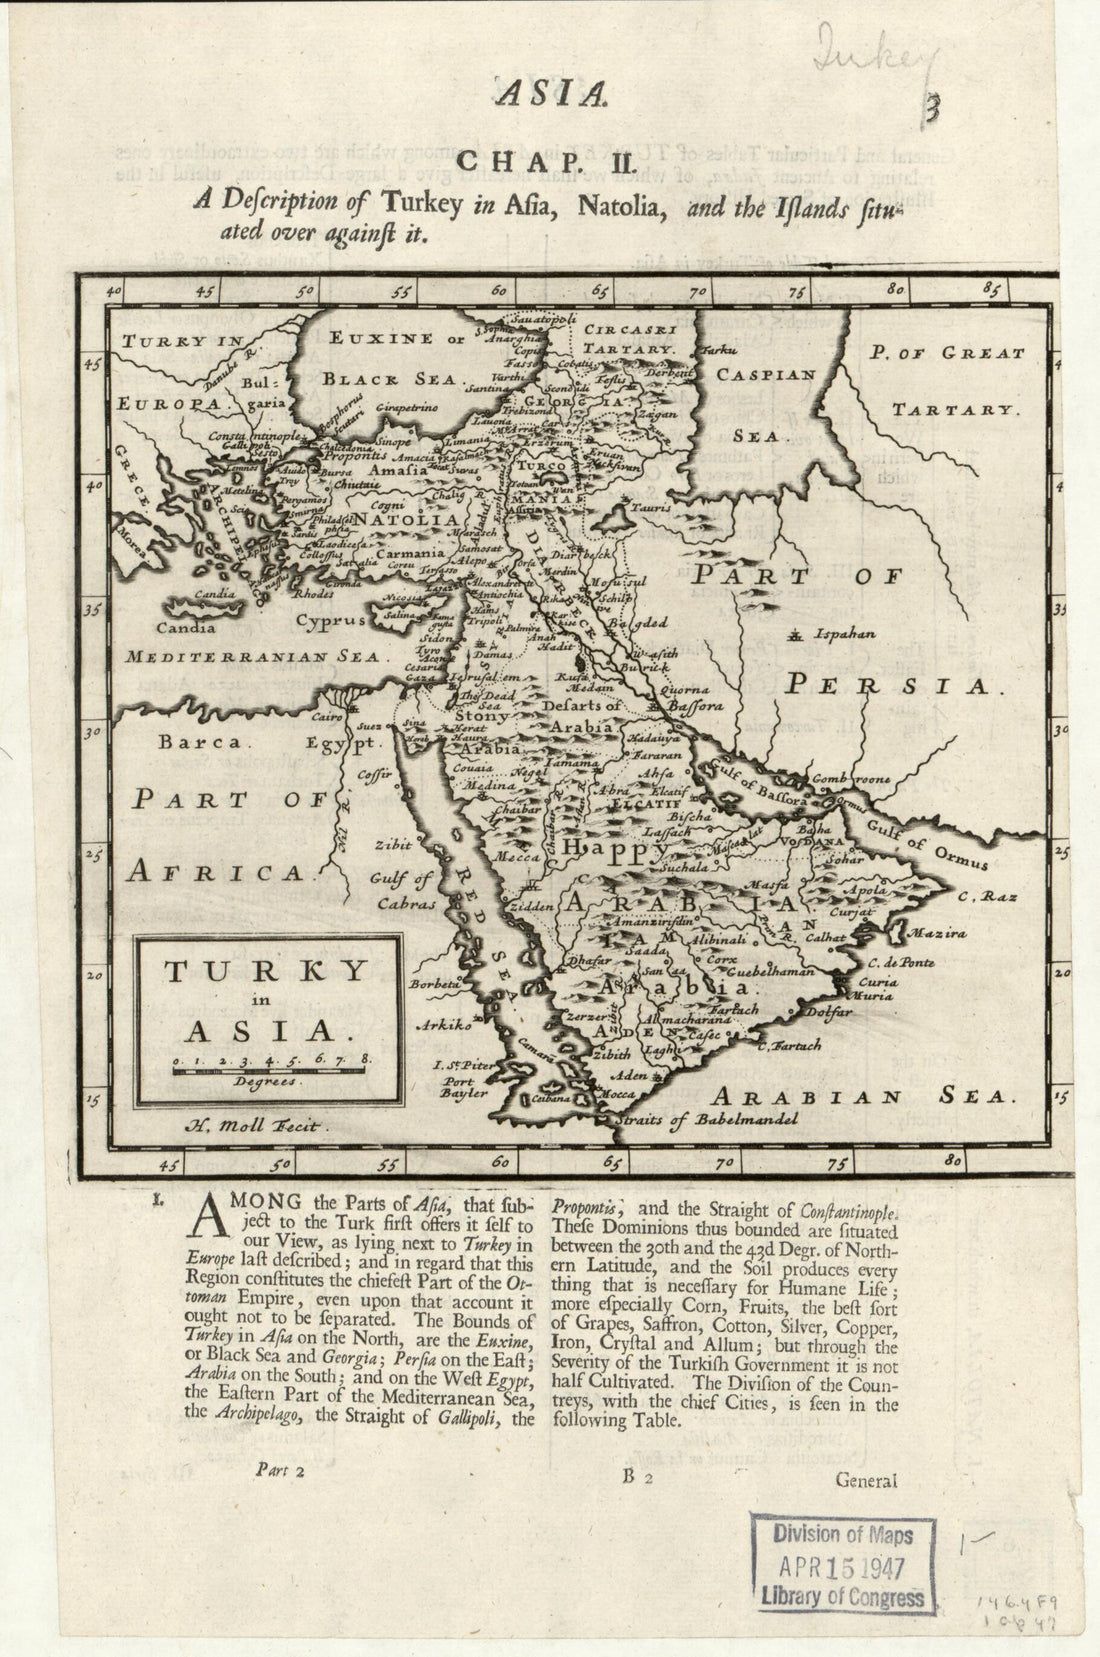 This old map of Turky In Asia (Description of Turkey In Asia, Natolia, and the Islands Situated Over Against It, Asia. Chap. II) from 1783 was created by Herman Moll in 1783